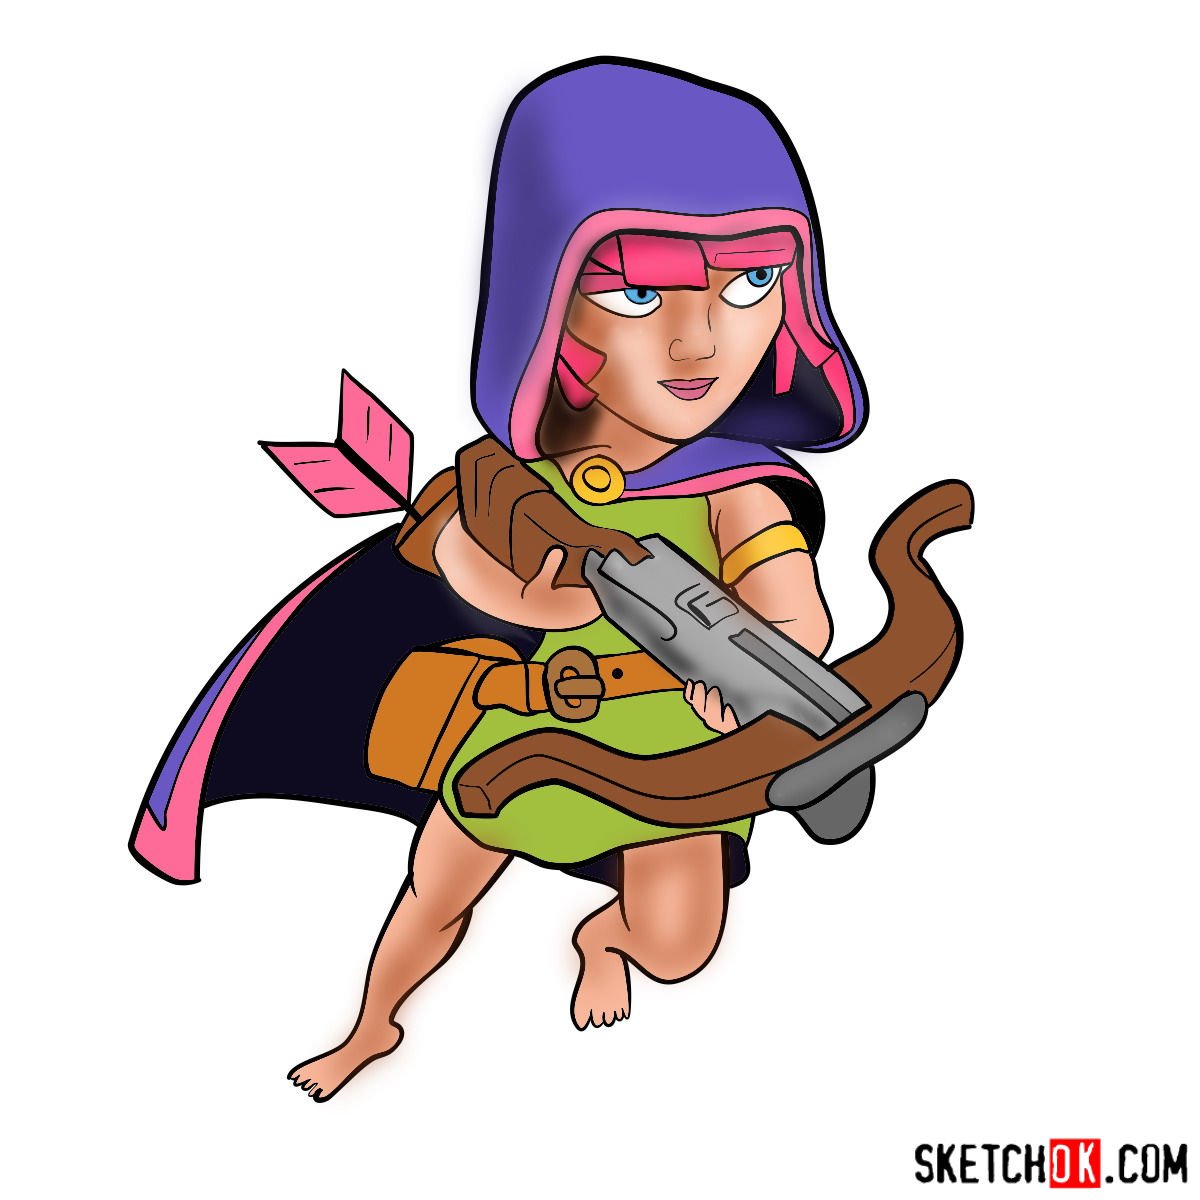 How to draw Sneaky Archer from Clash of Clans